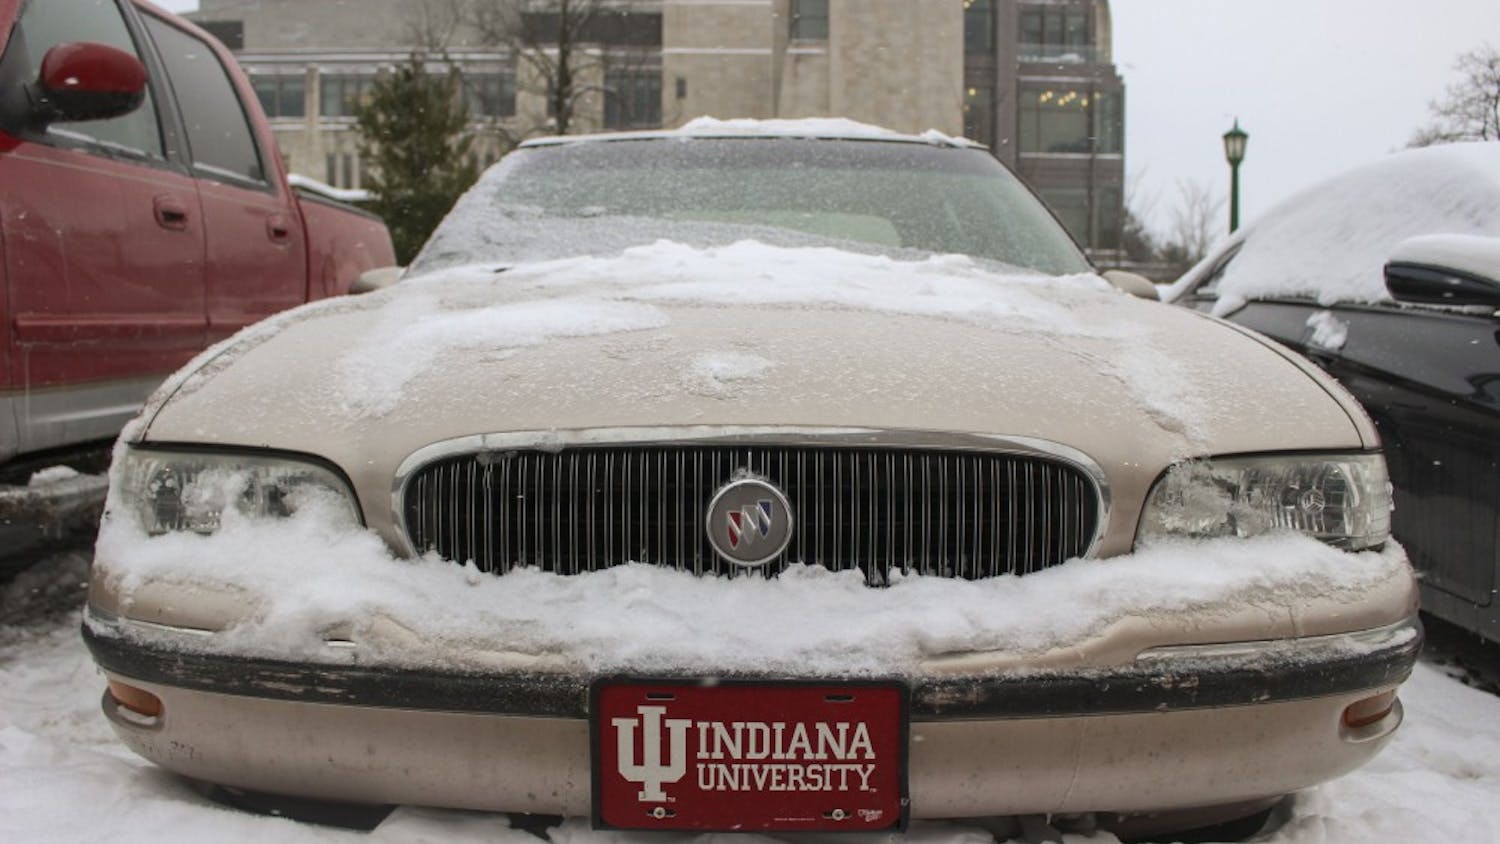 Carl, a tan 90s Buick who belongs to sophomore Meghan Halaburda, will be in an upcoming film called "Hoosier" made by local filmmakers. Halaburda found a note on her car, which she thought was a parking ticket, asking her about using her car in the LGBT-themed film.&nbsp;